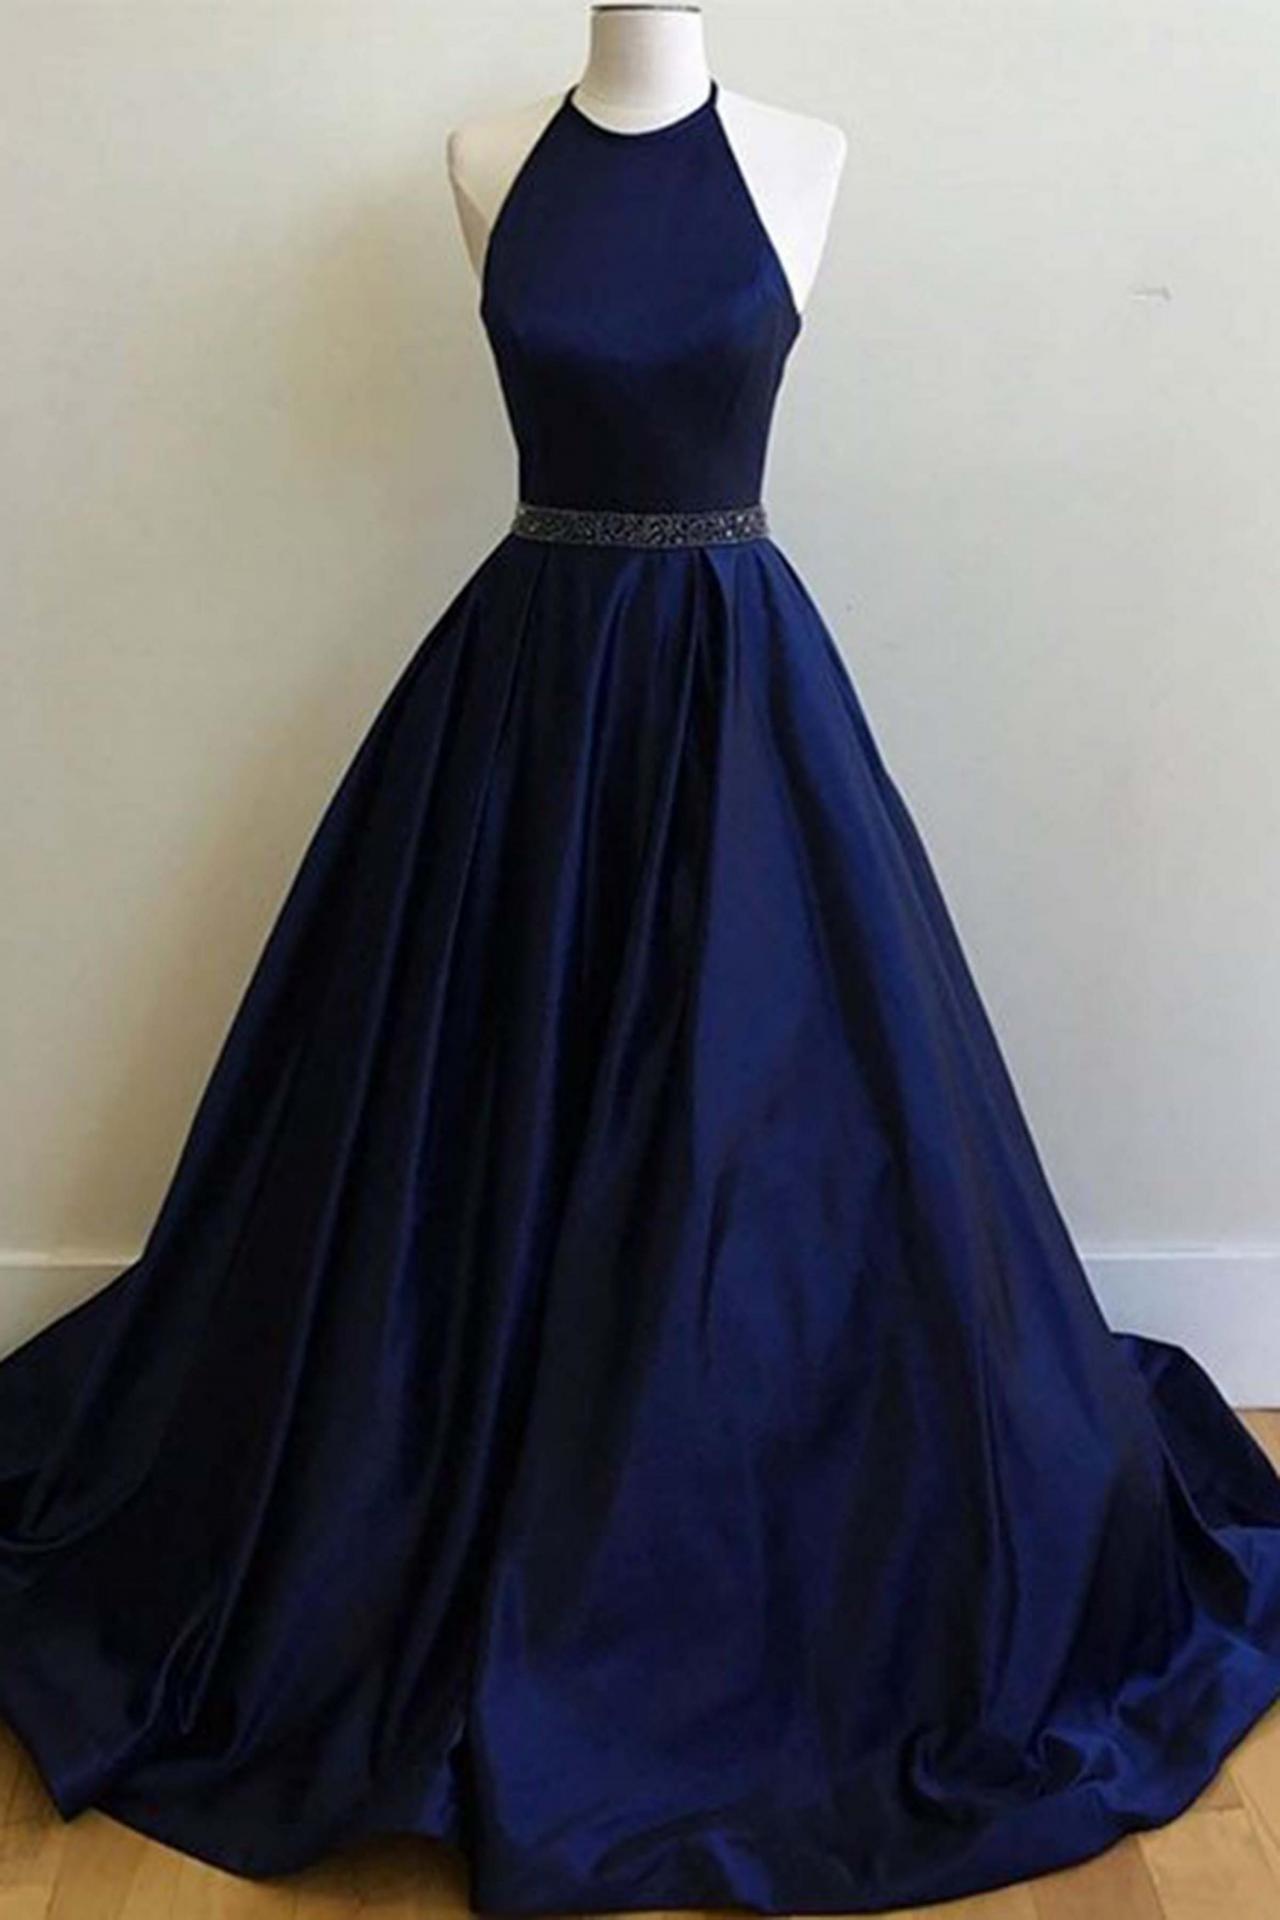 Charming Halter Satin Prom Dress,simple A-line Sleeveless Graduation Party Dresses,evening Dresses For Teens.p1168